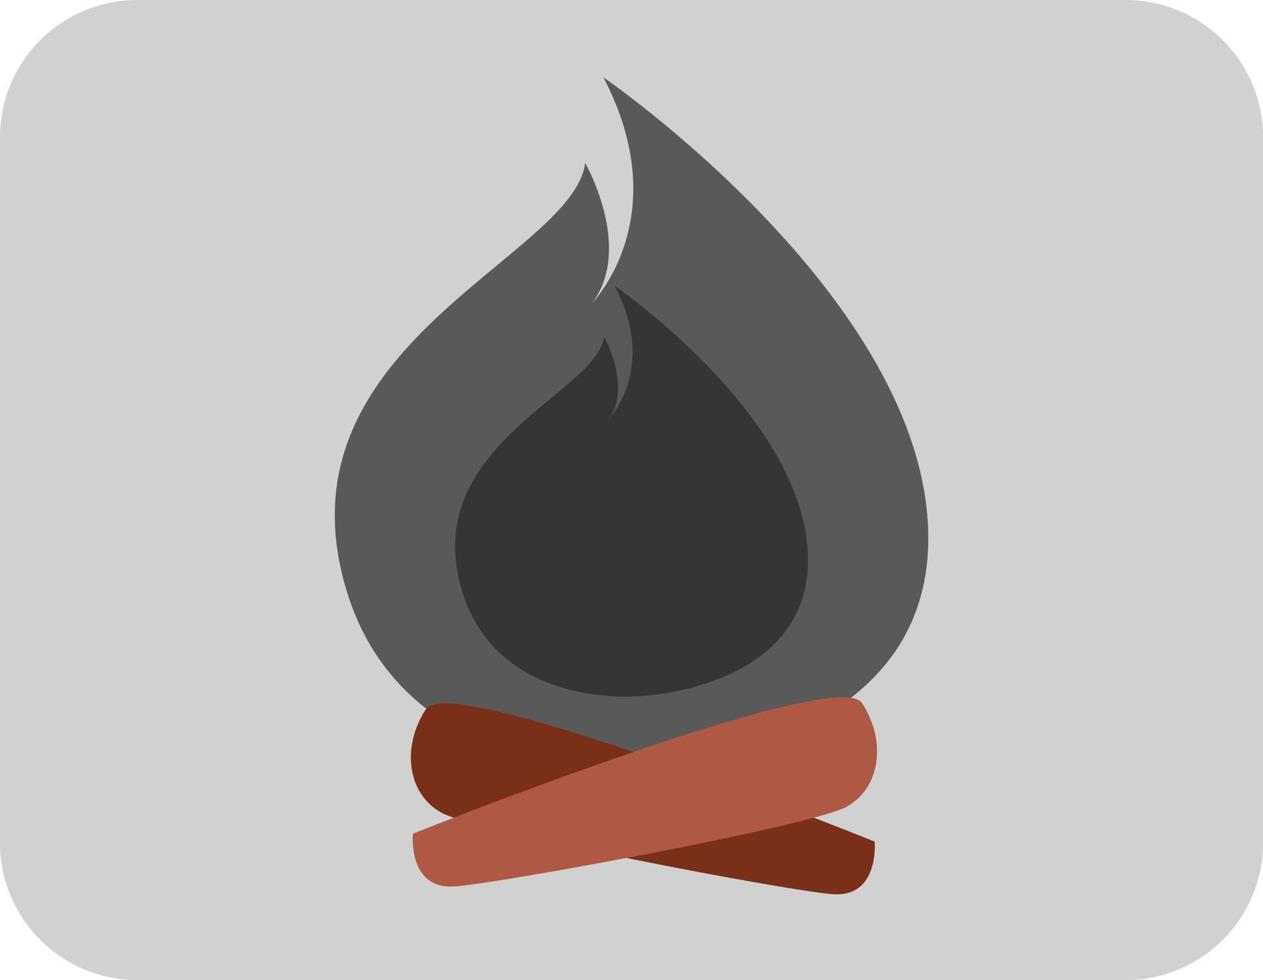 Industrial fire, icon, vector on white background.